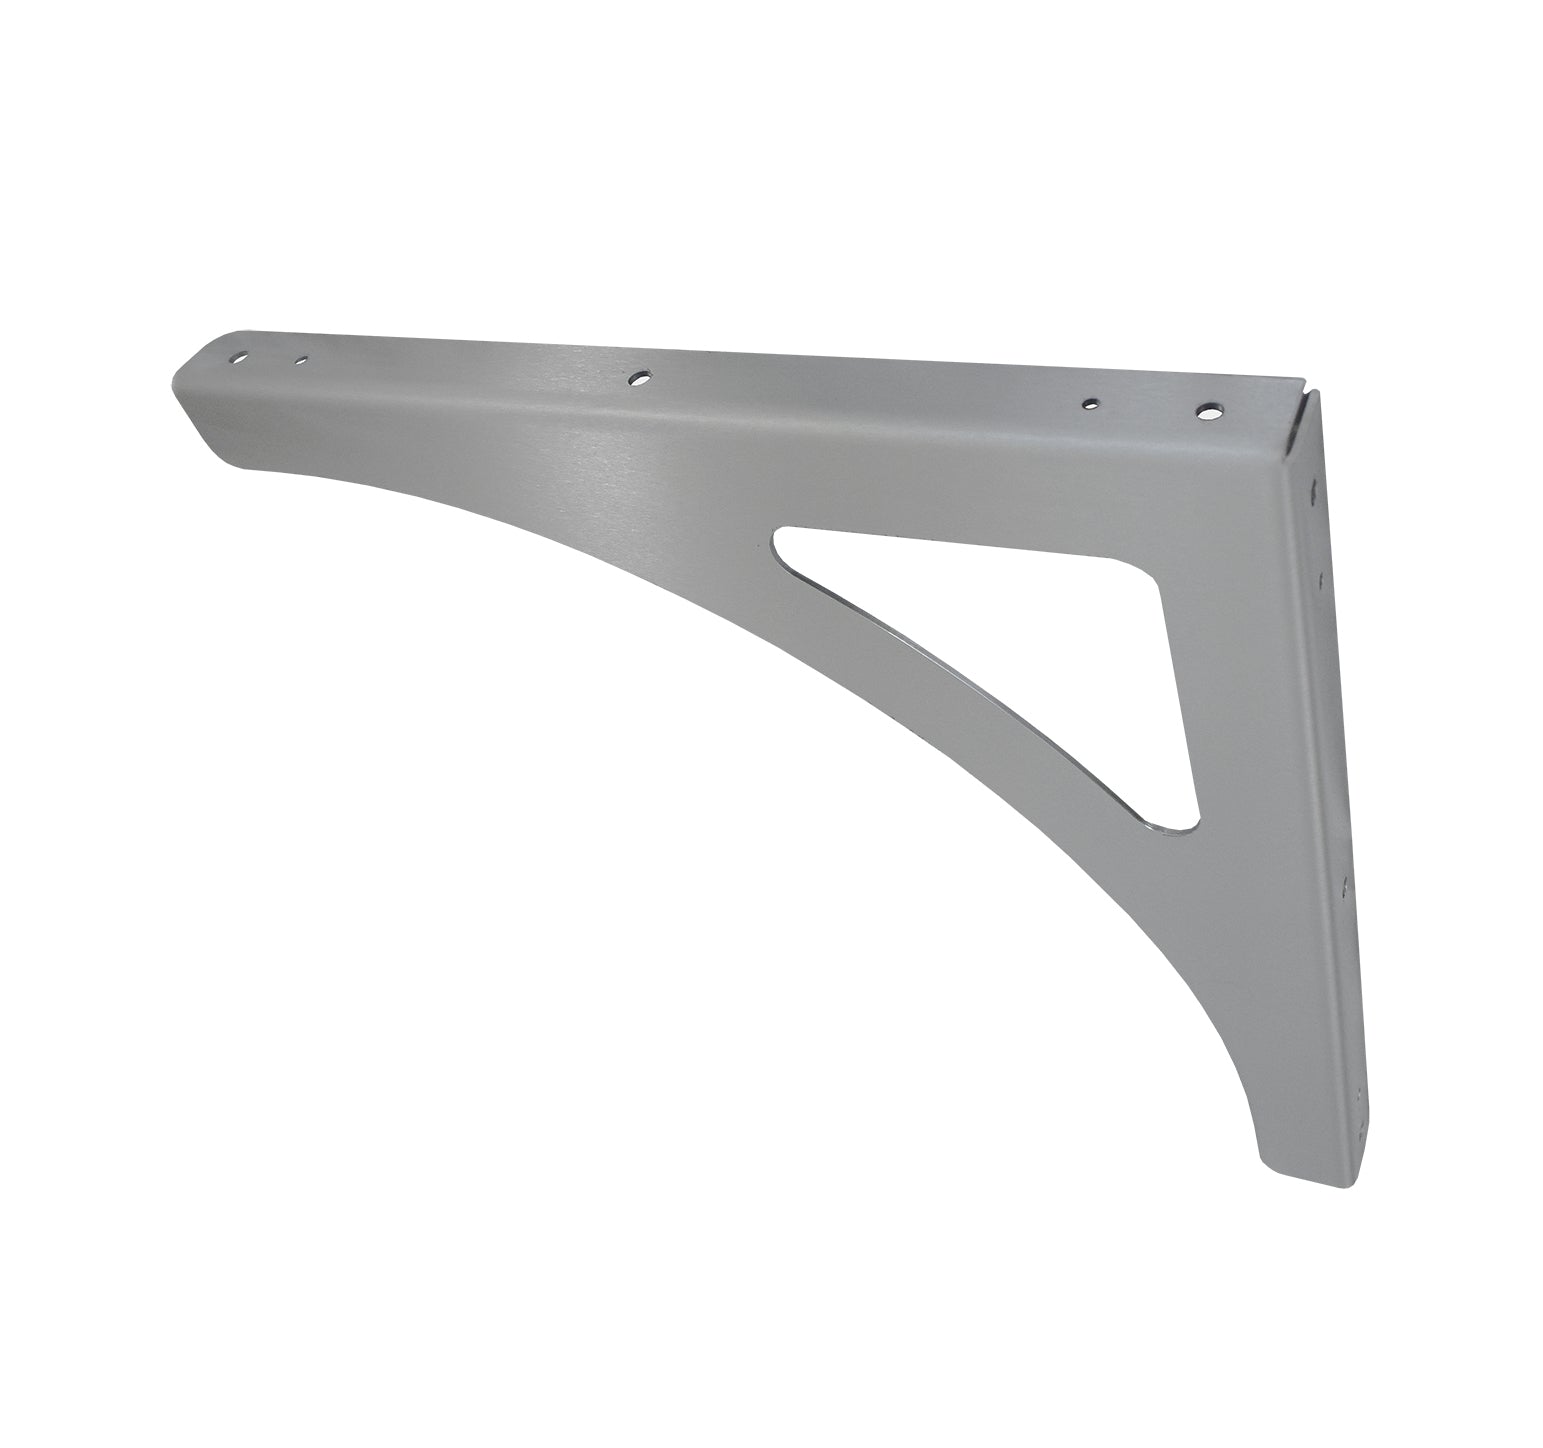 Replacement bracket for Trespa® lab benches